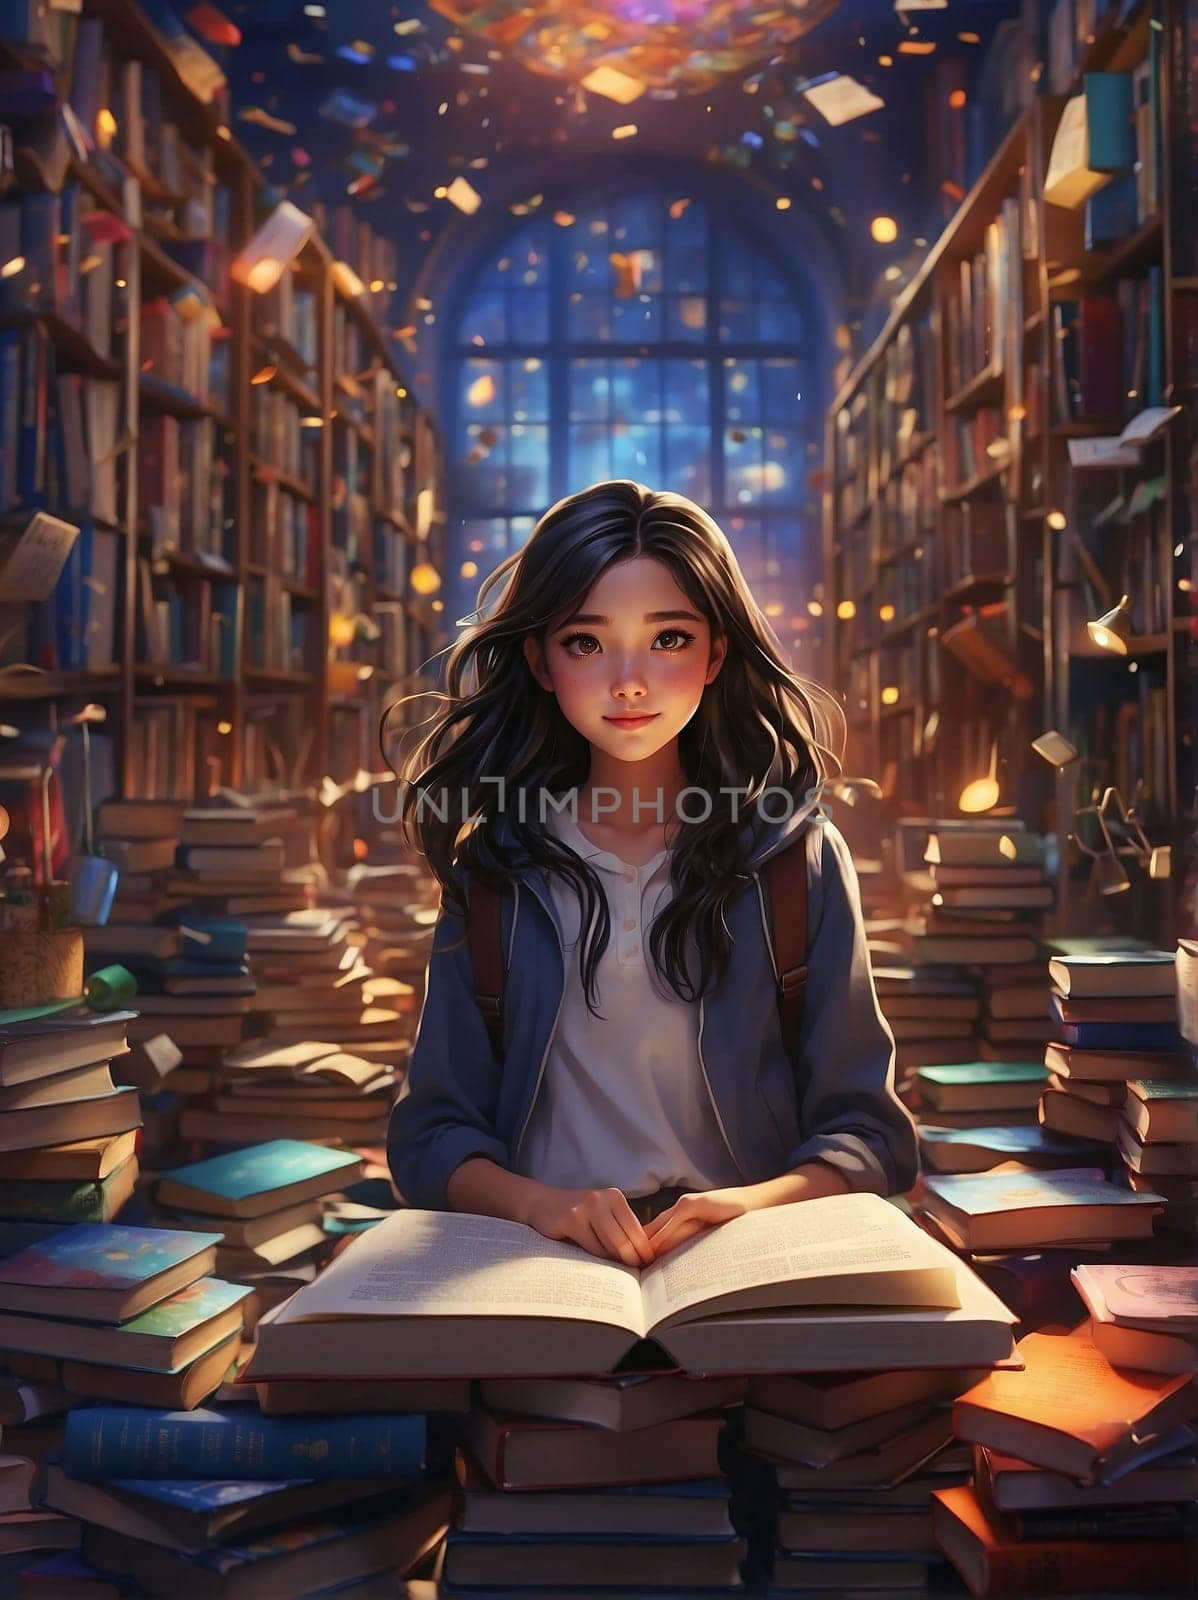 A girl sits on a pile of books in a peaceful library, engrossed in studying and expanding her knowledge.